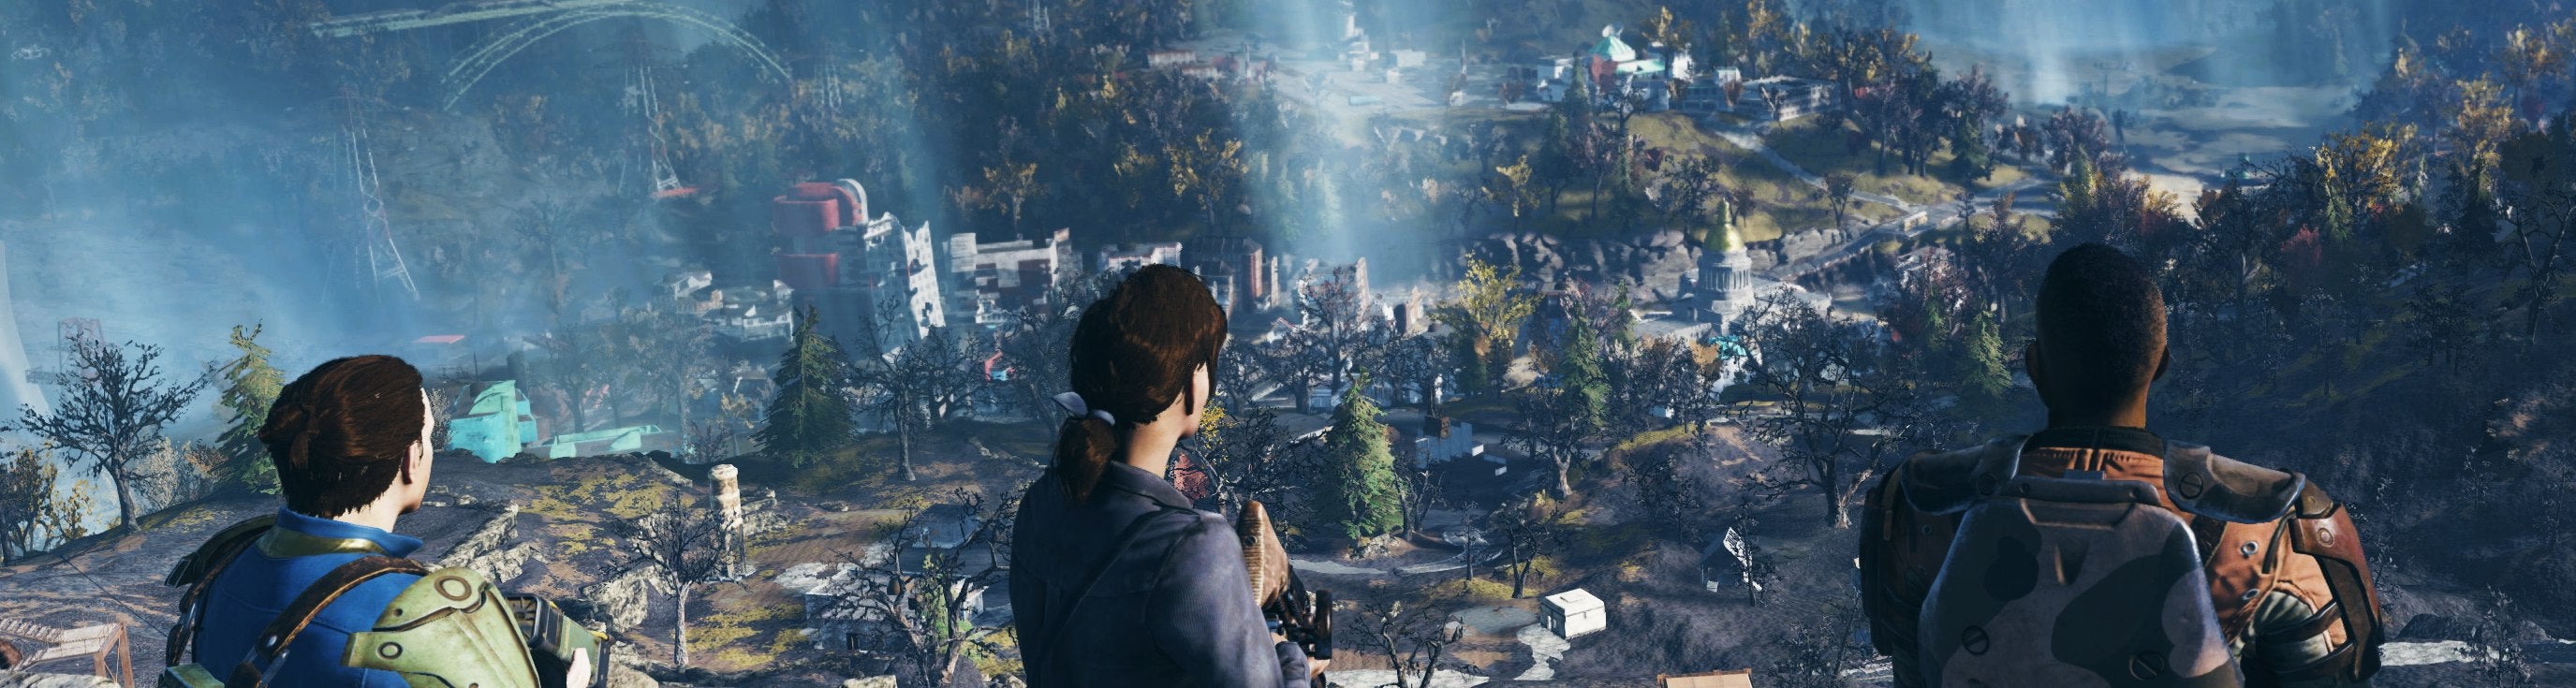 Image for Fallout 76 Digital Sales Down Nearly 50 Percent Compared to Fallout 4's Launch